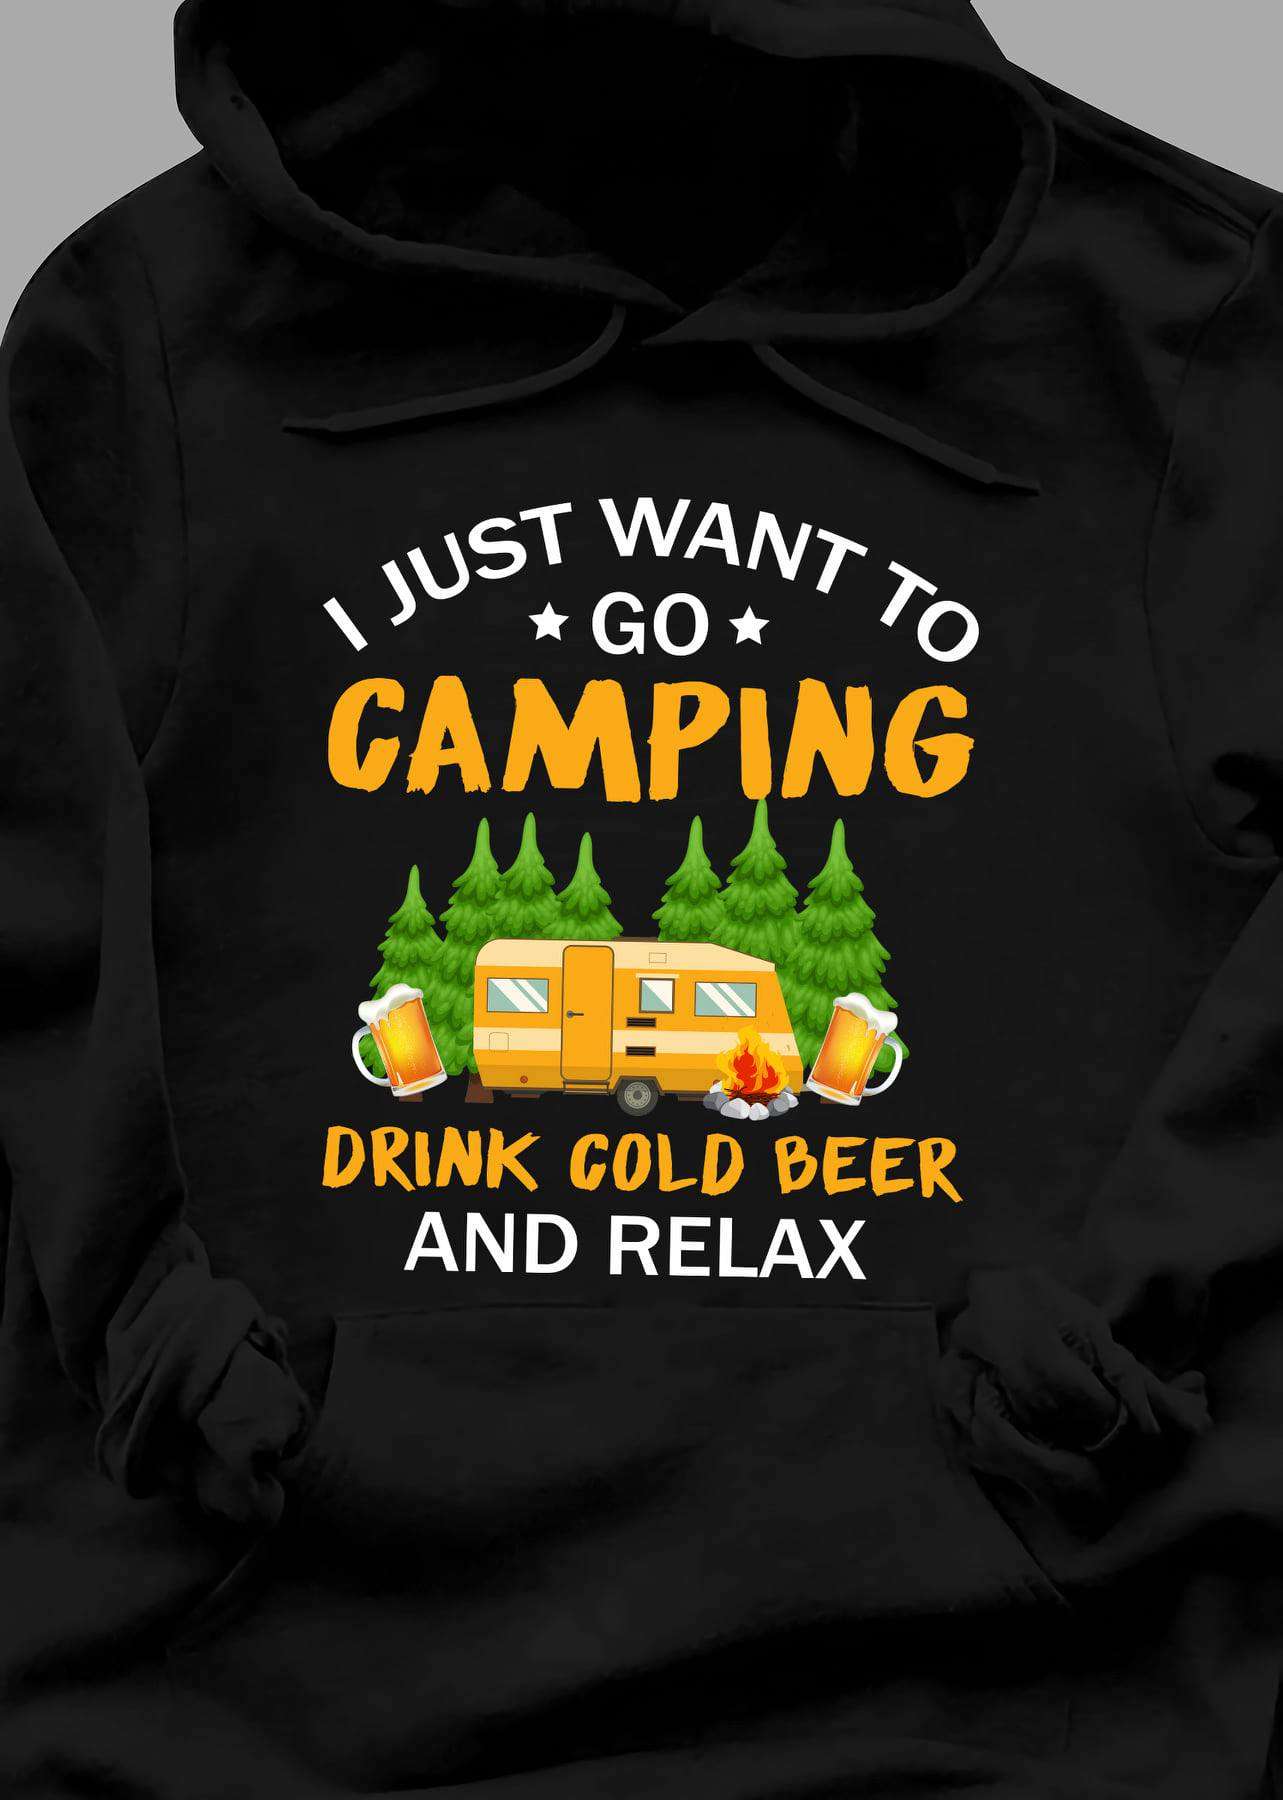 Camping Car And Beer - I just want to go camping drinkk cold beer and relax